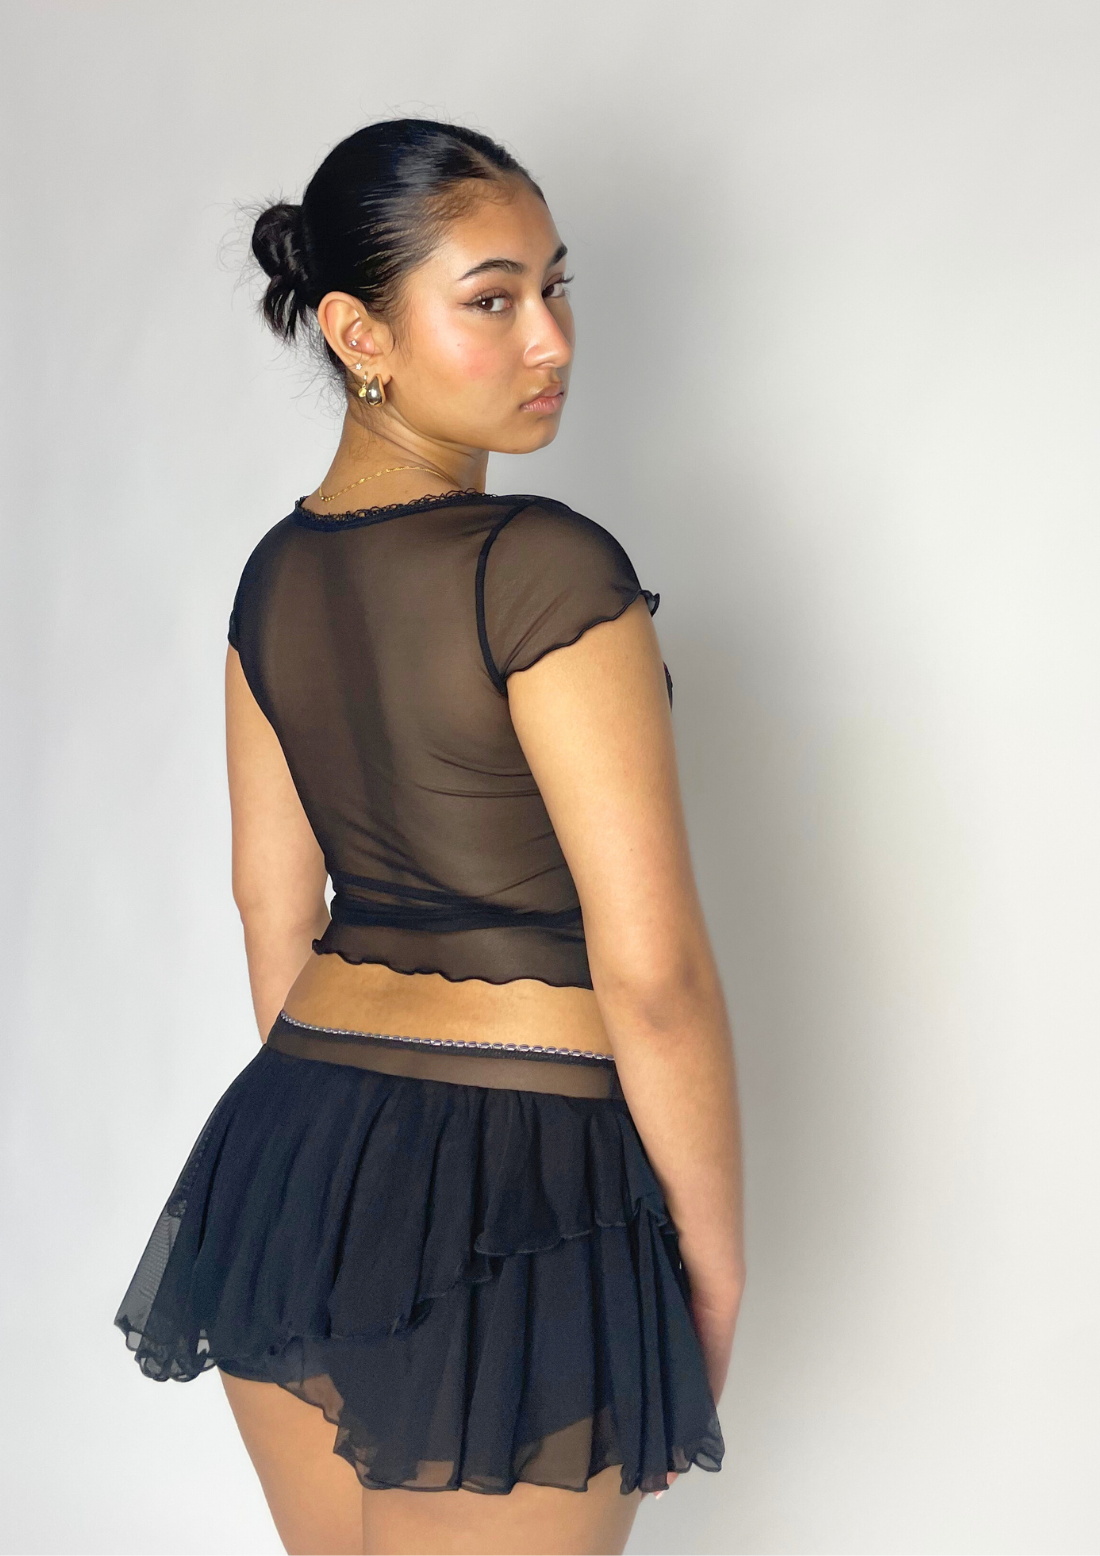 Cap Sleeve Top In Black Mesh With Bow Detail